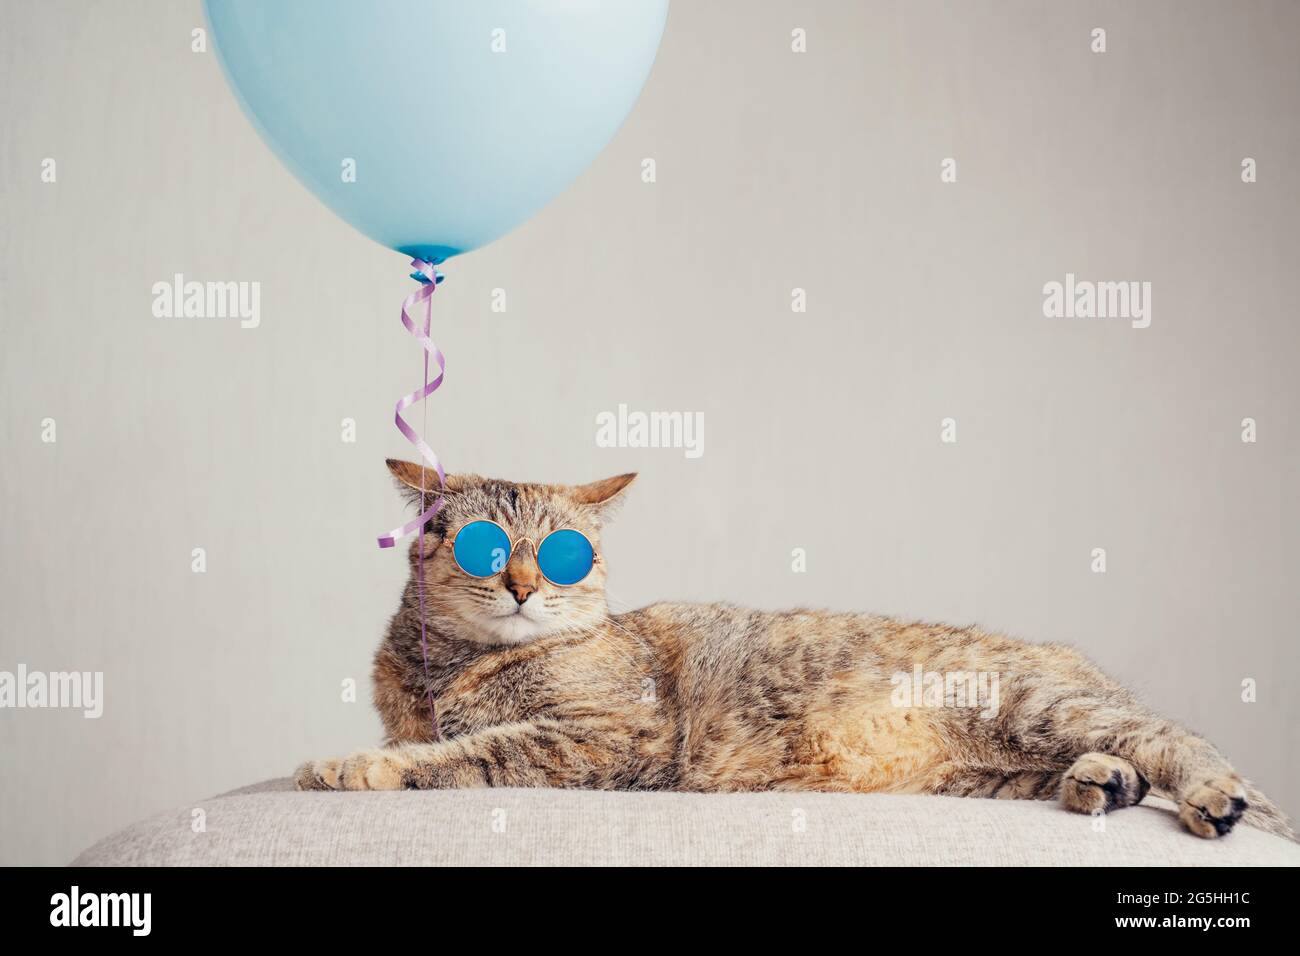 Ginger cat in trendy sunglasses lying beside a blue balloon on a couch. Stock Photo